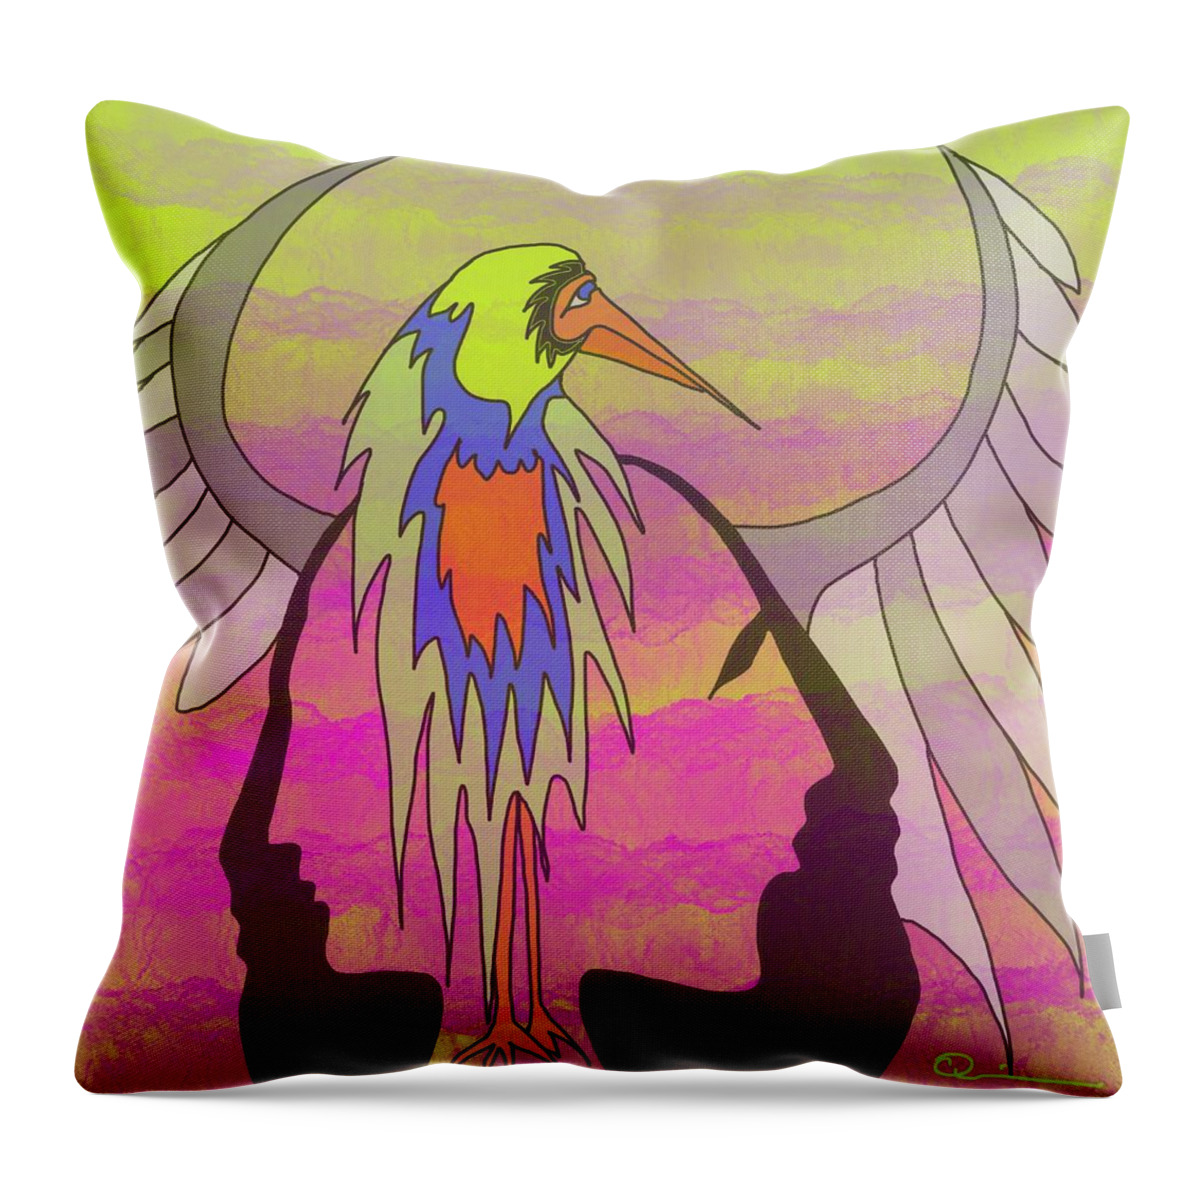 Quiros Throw Pillow featuring the digital art Wings by Jeffrey Quiros